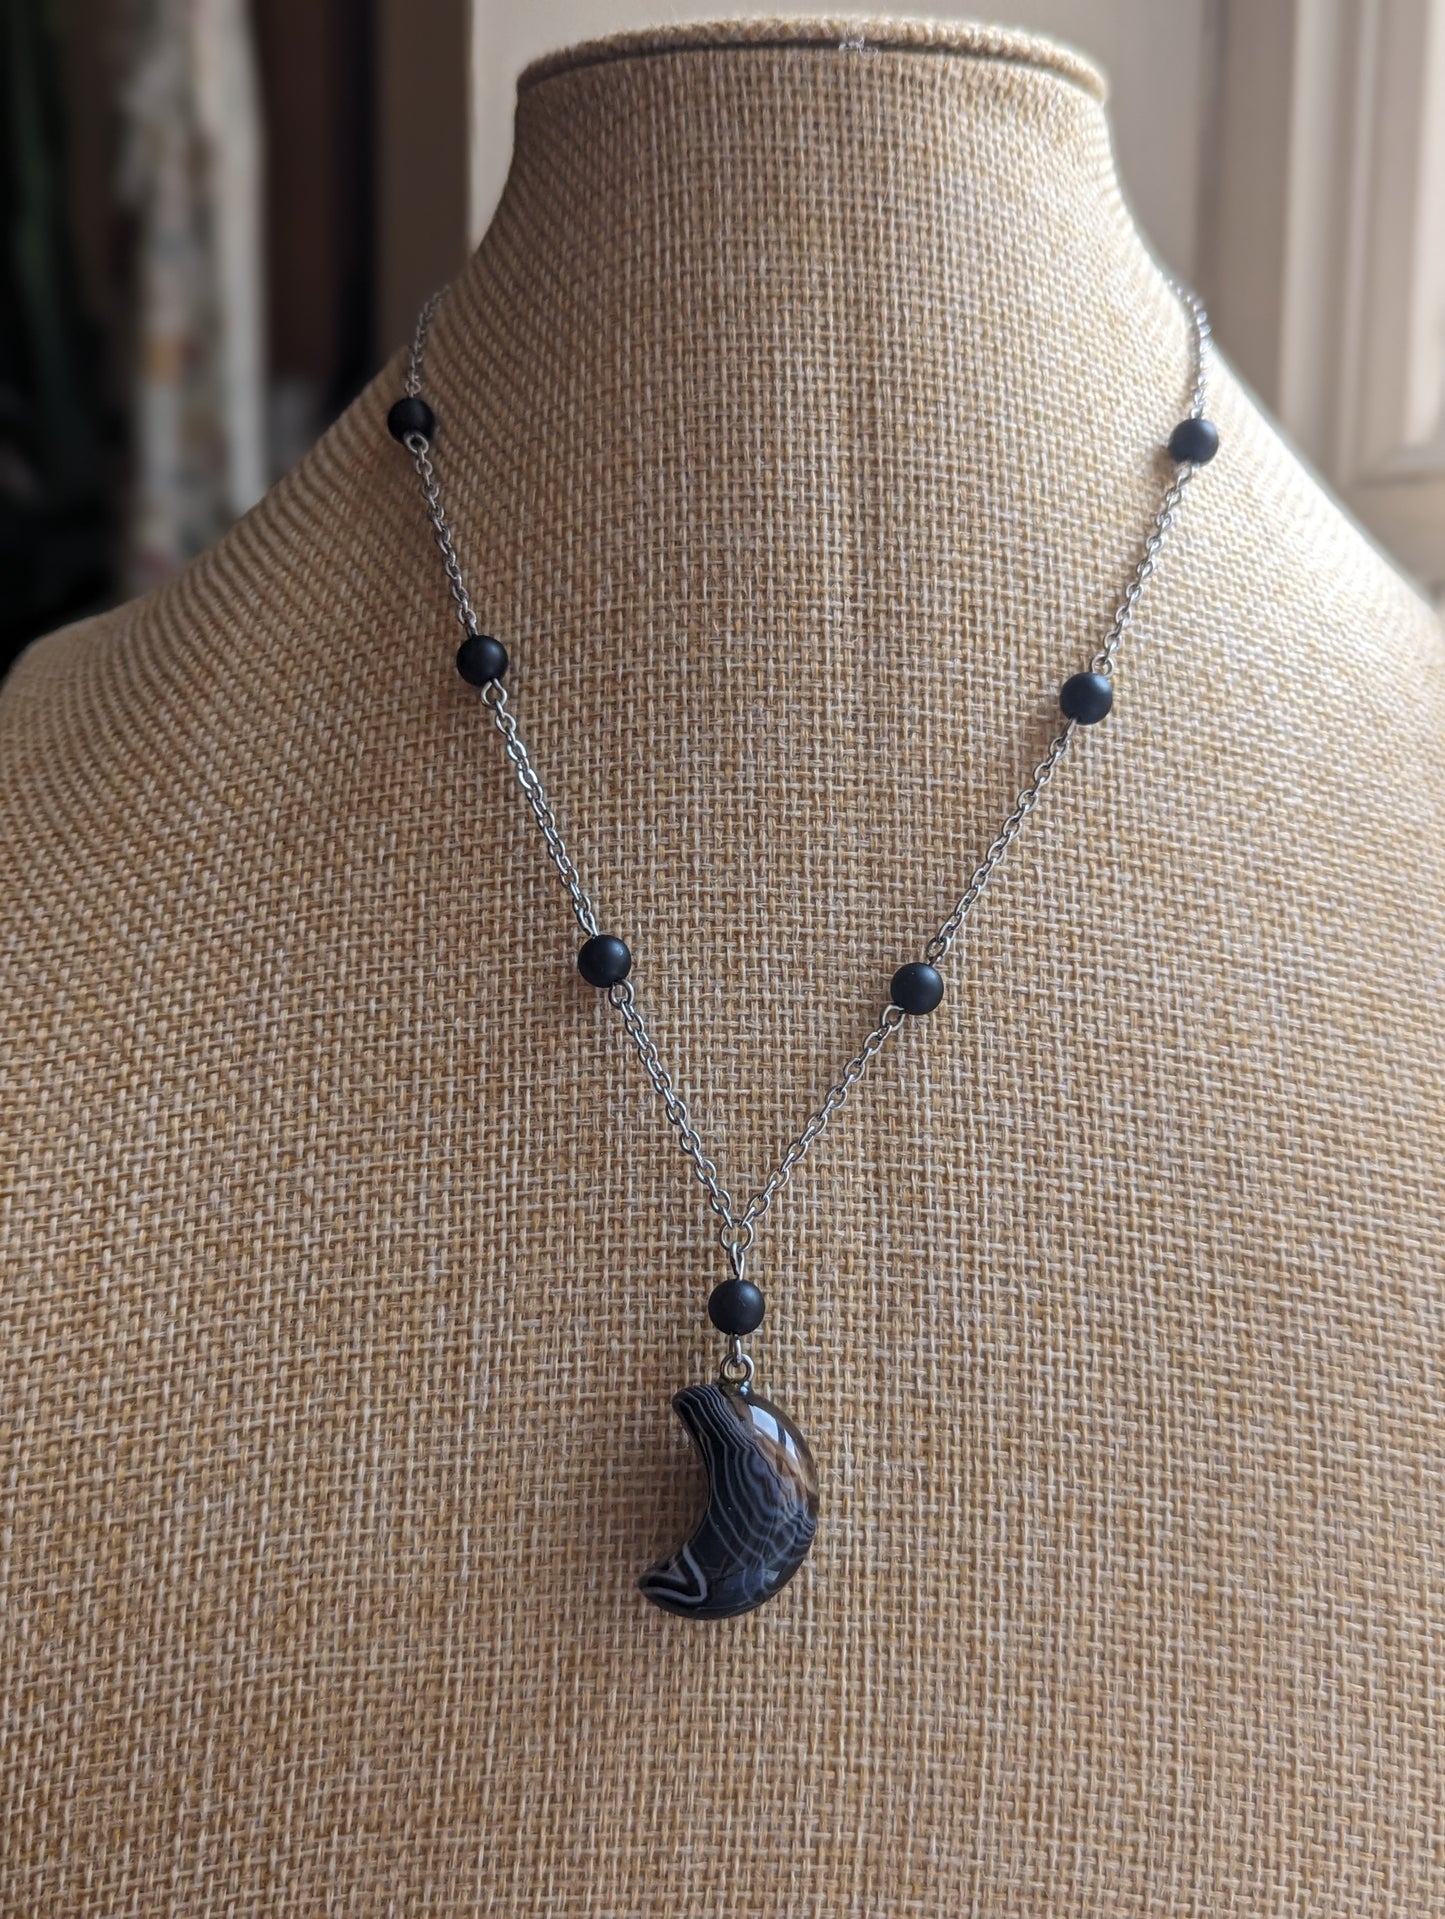 Black Agate Crescent Moon and Onyx on Stainless Necklace